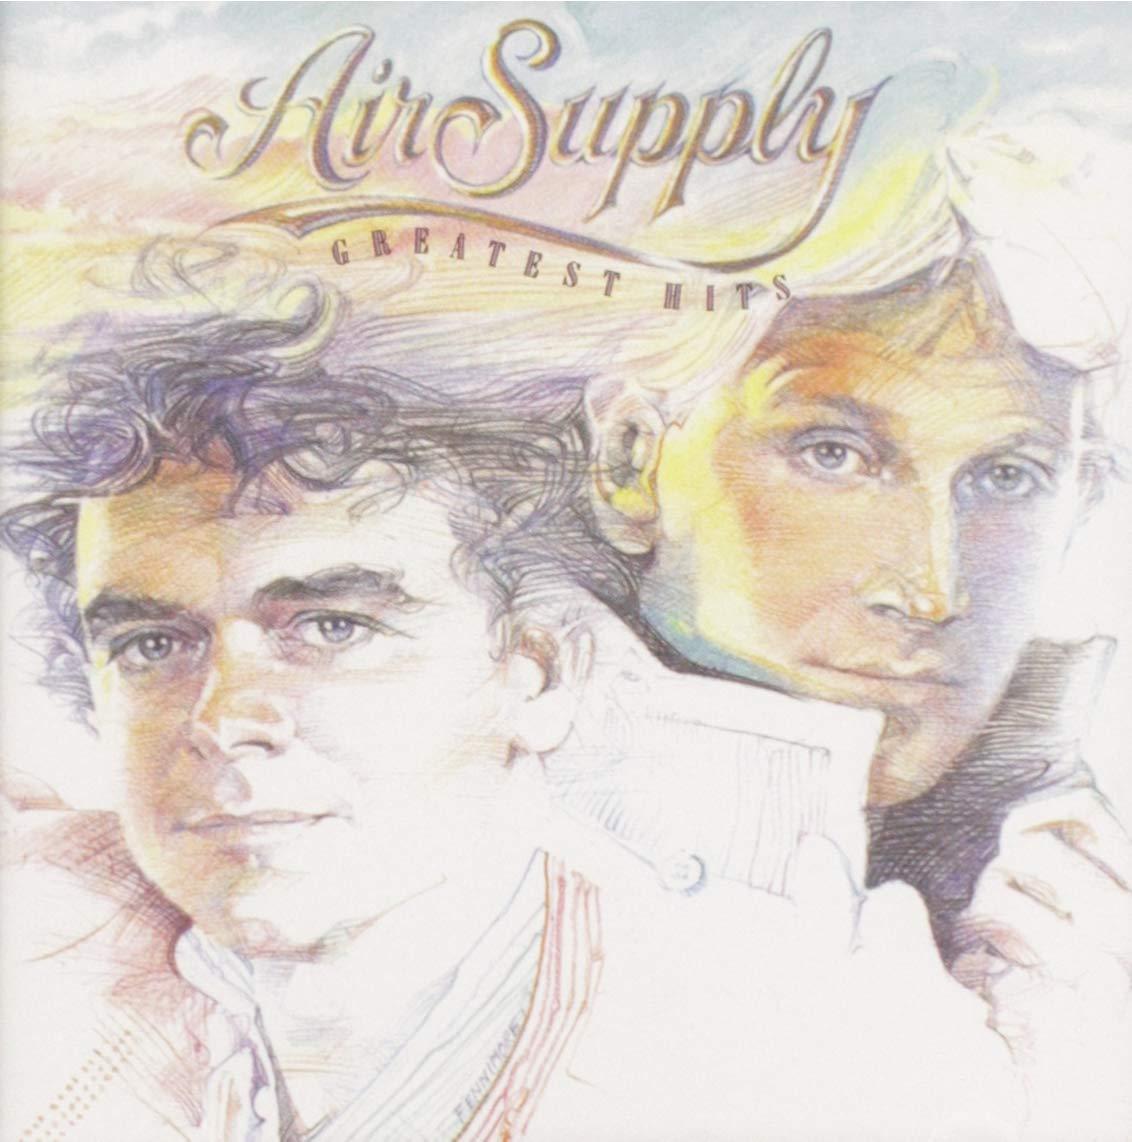 Air Supply- Greatest Hits - Darkside Records